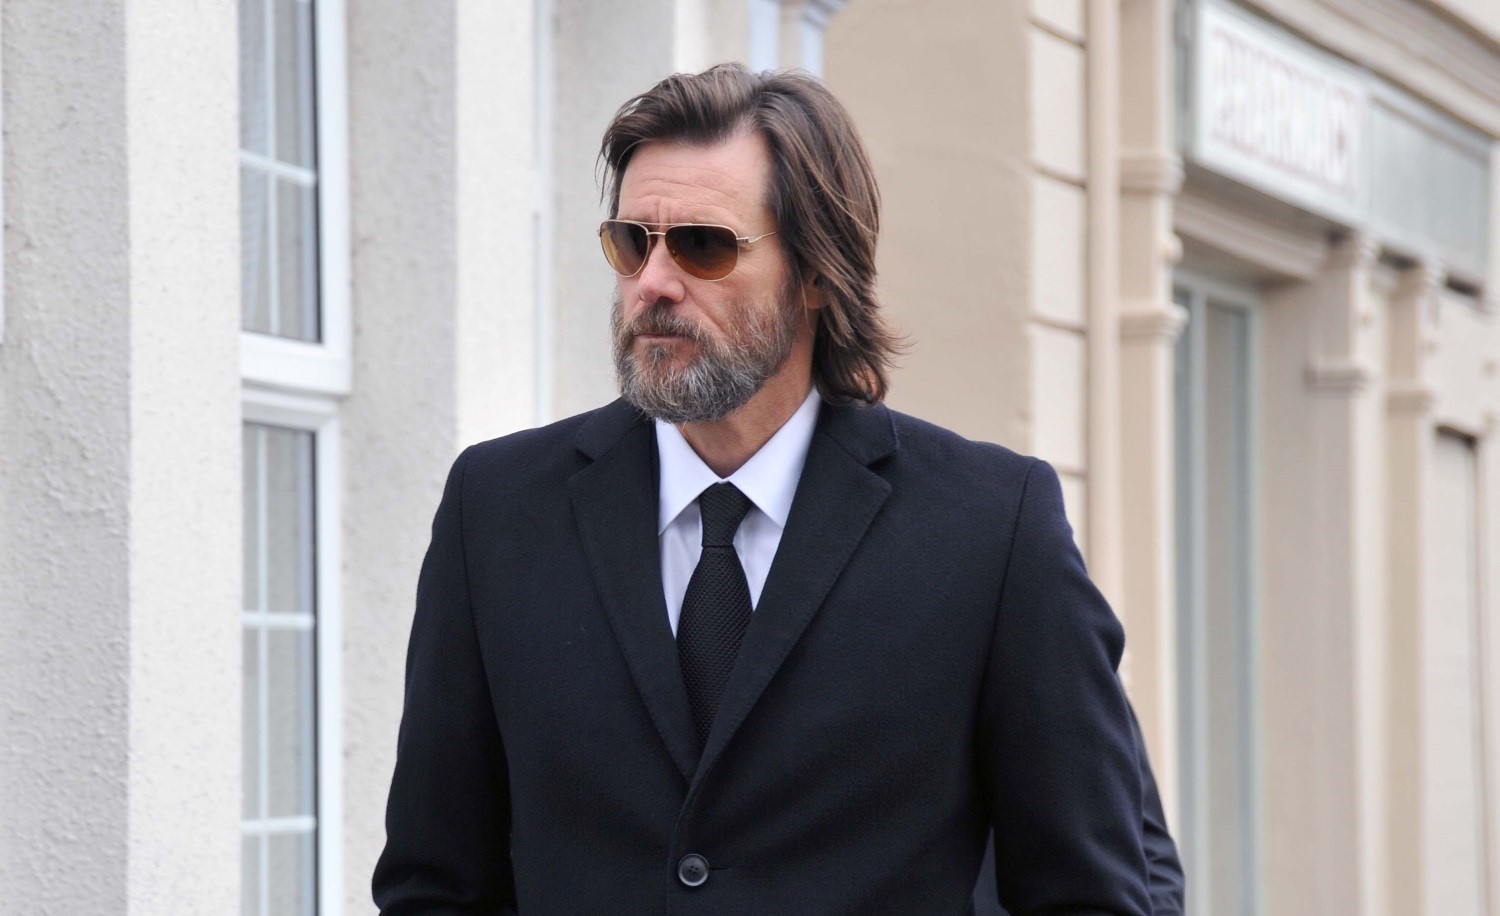 Funeral mass of Cathriona White takes place in Our Lady of Fatima Church in Cappawhite, Co. Tipperary. Her coffin was carried by ex-boyfriend Jim Carrey and others. Featuring: Jim Carrey Where: Cappawhite, Tipperary, Ireland When: 10 Oct 2015 Credit: WENN.com **Not available for publication in Irish Tabloids, Irish magazines. Not available for evoke.ie.**